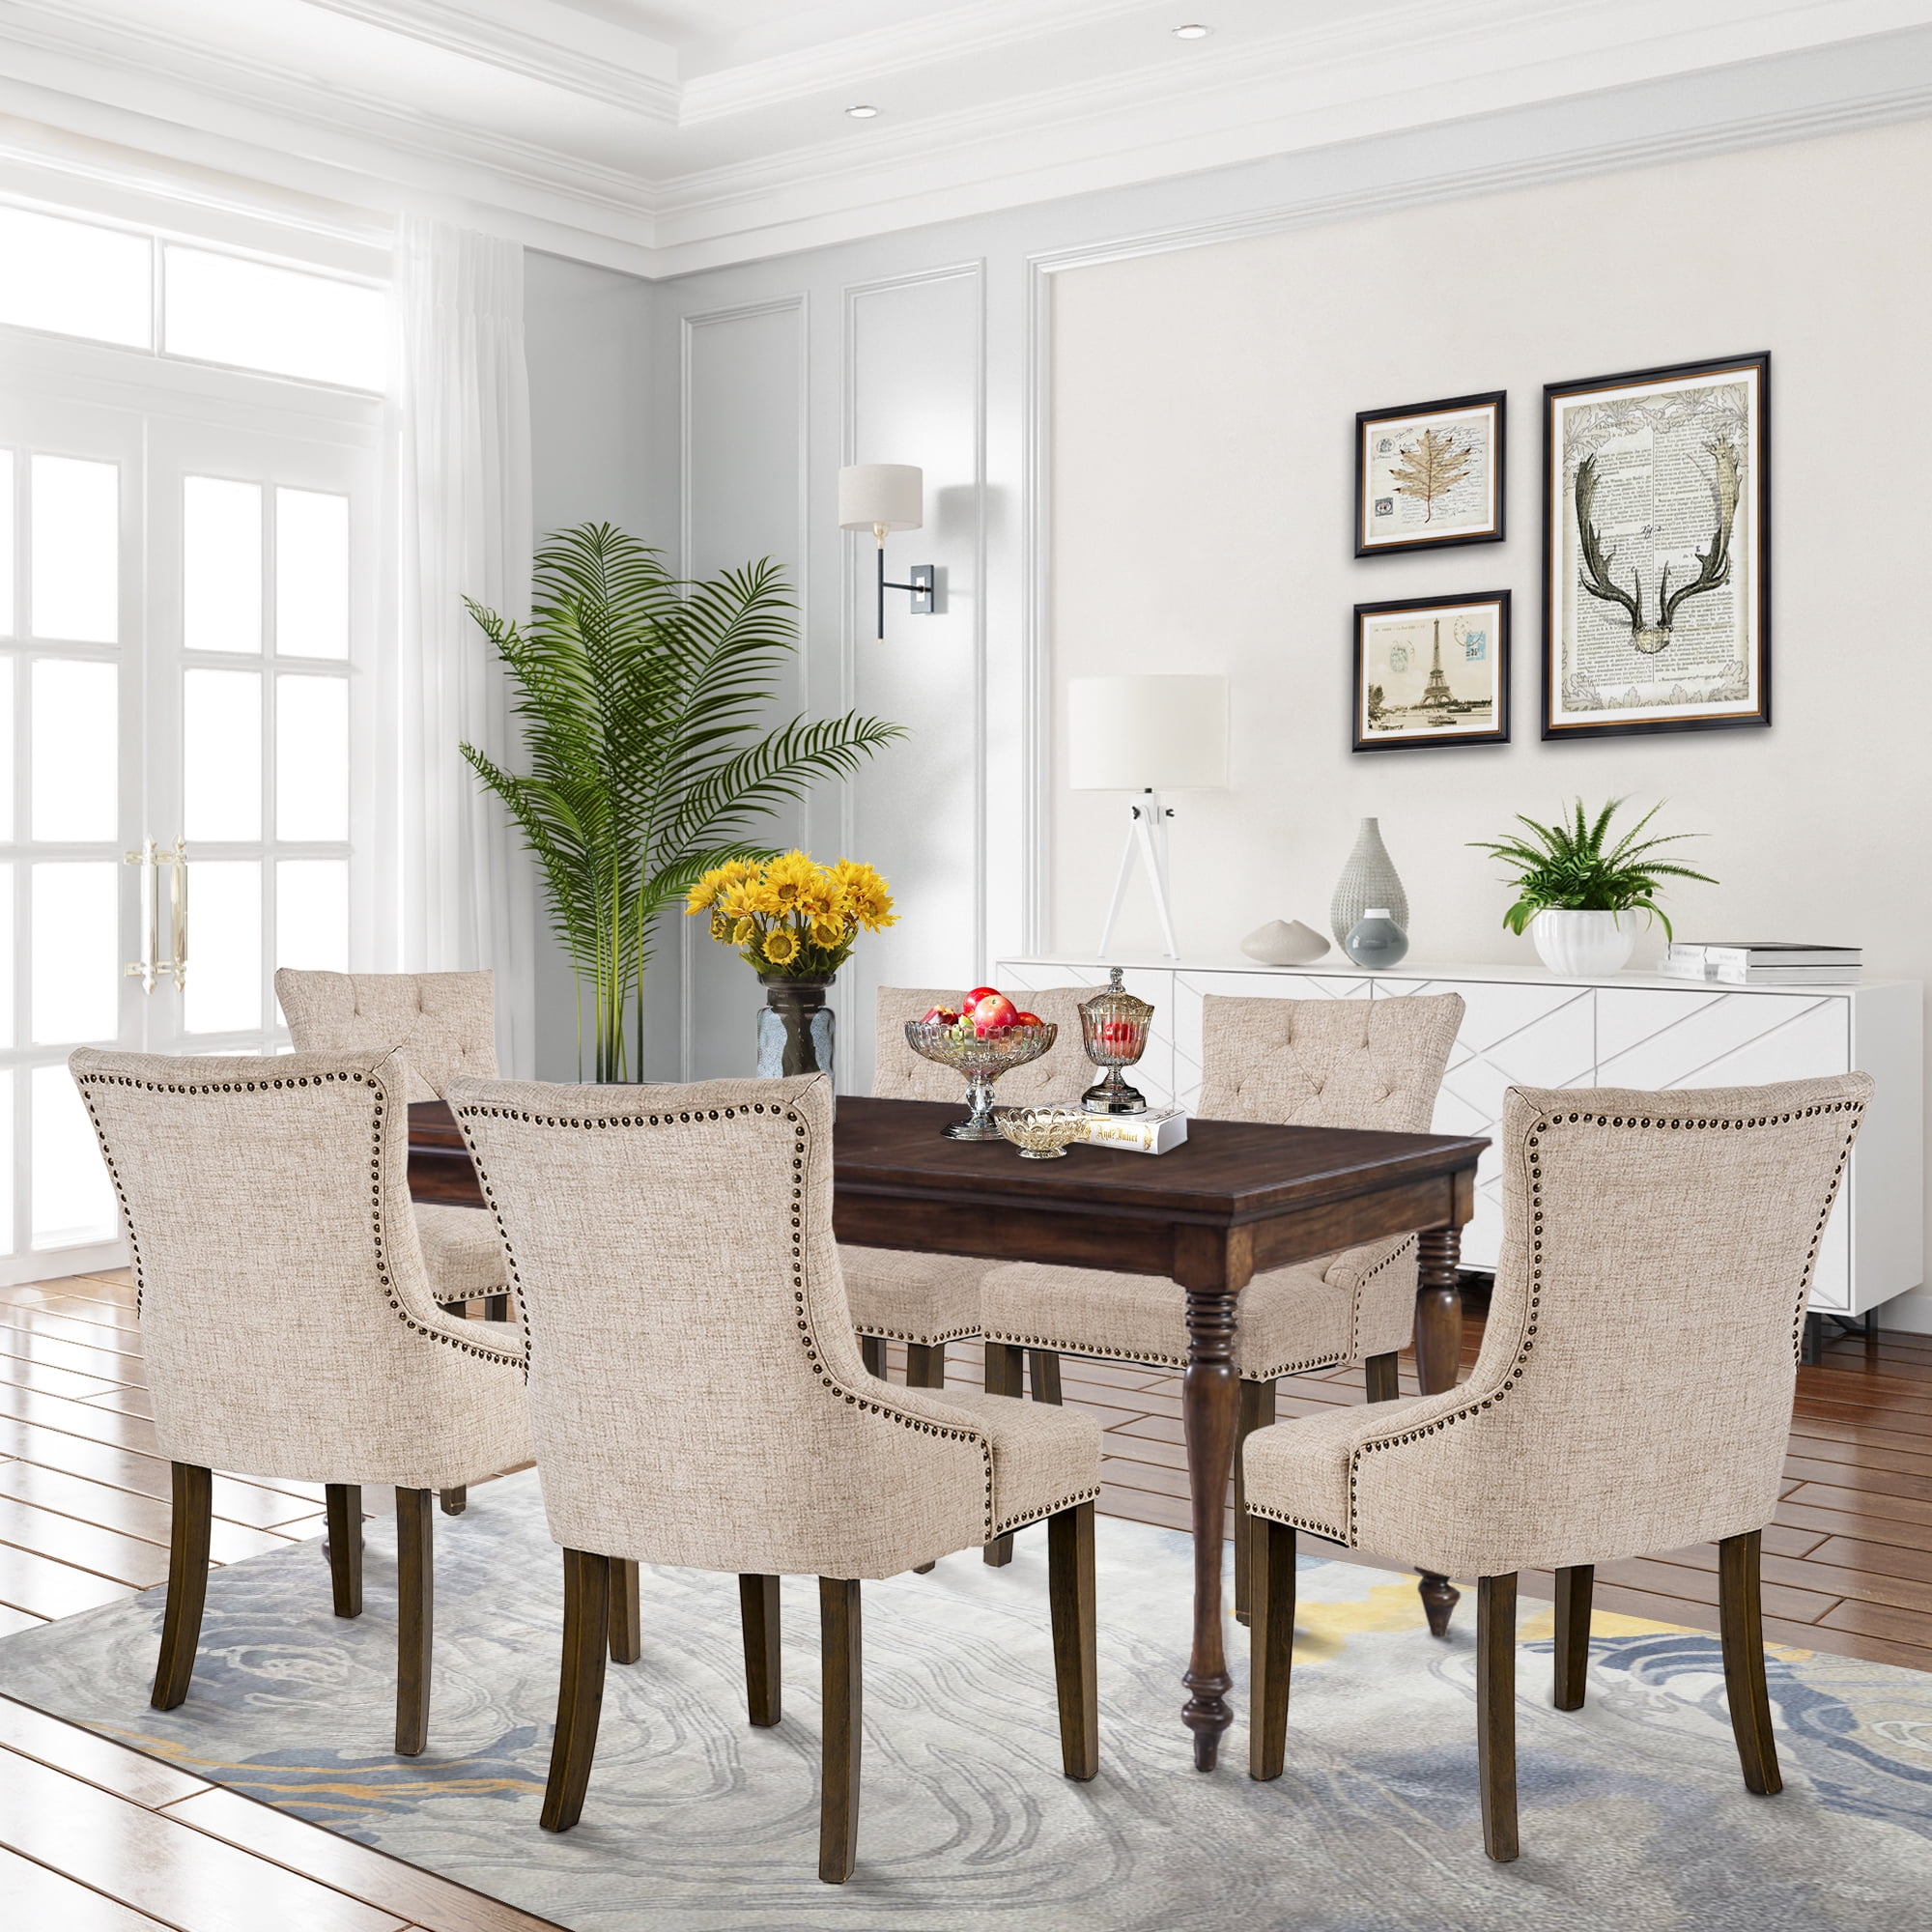 Tufted Upholstered Dining Chairs, Beautiful Dining Room Chairs